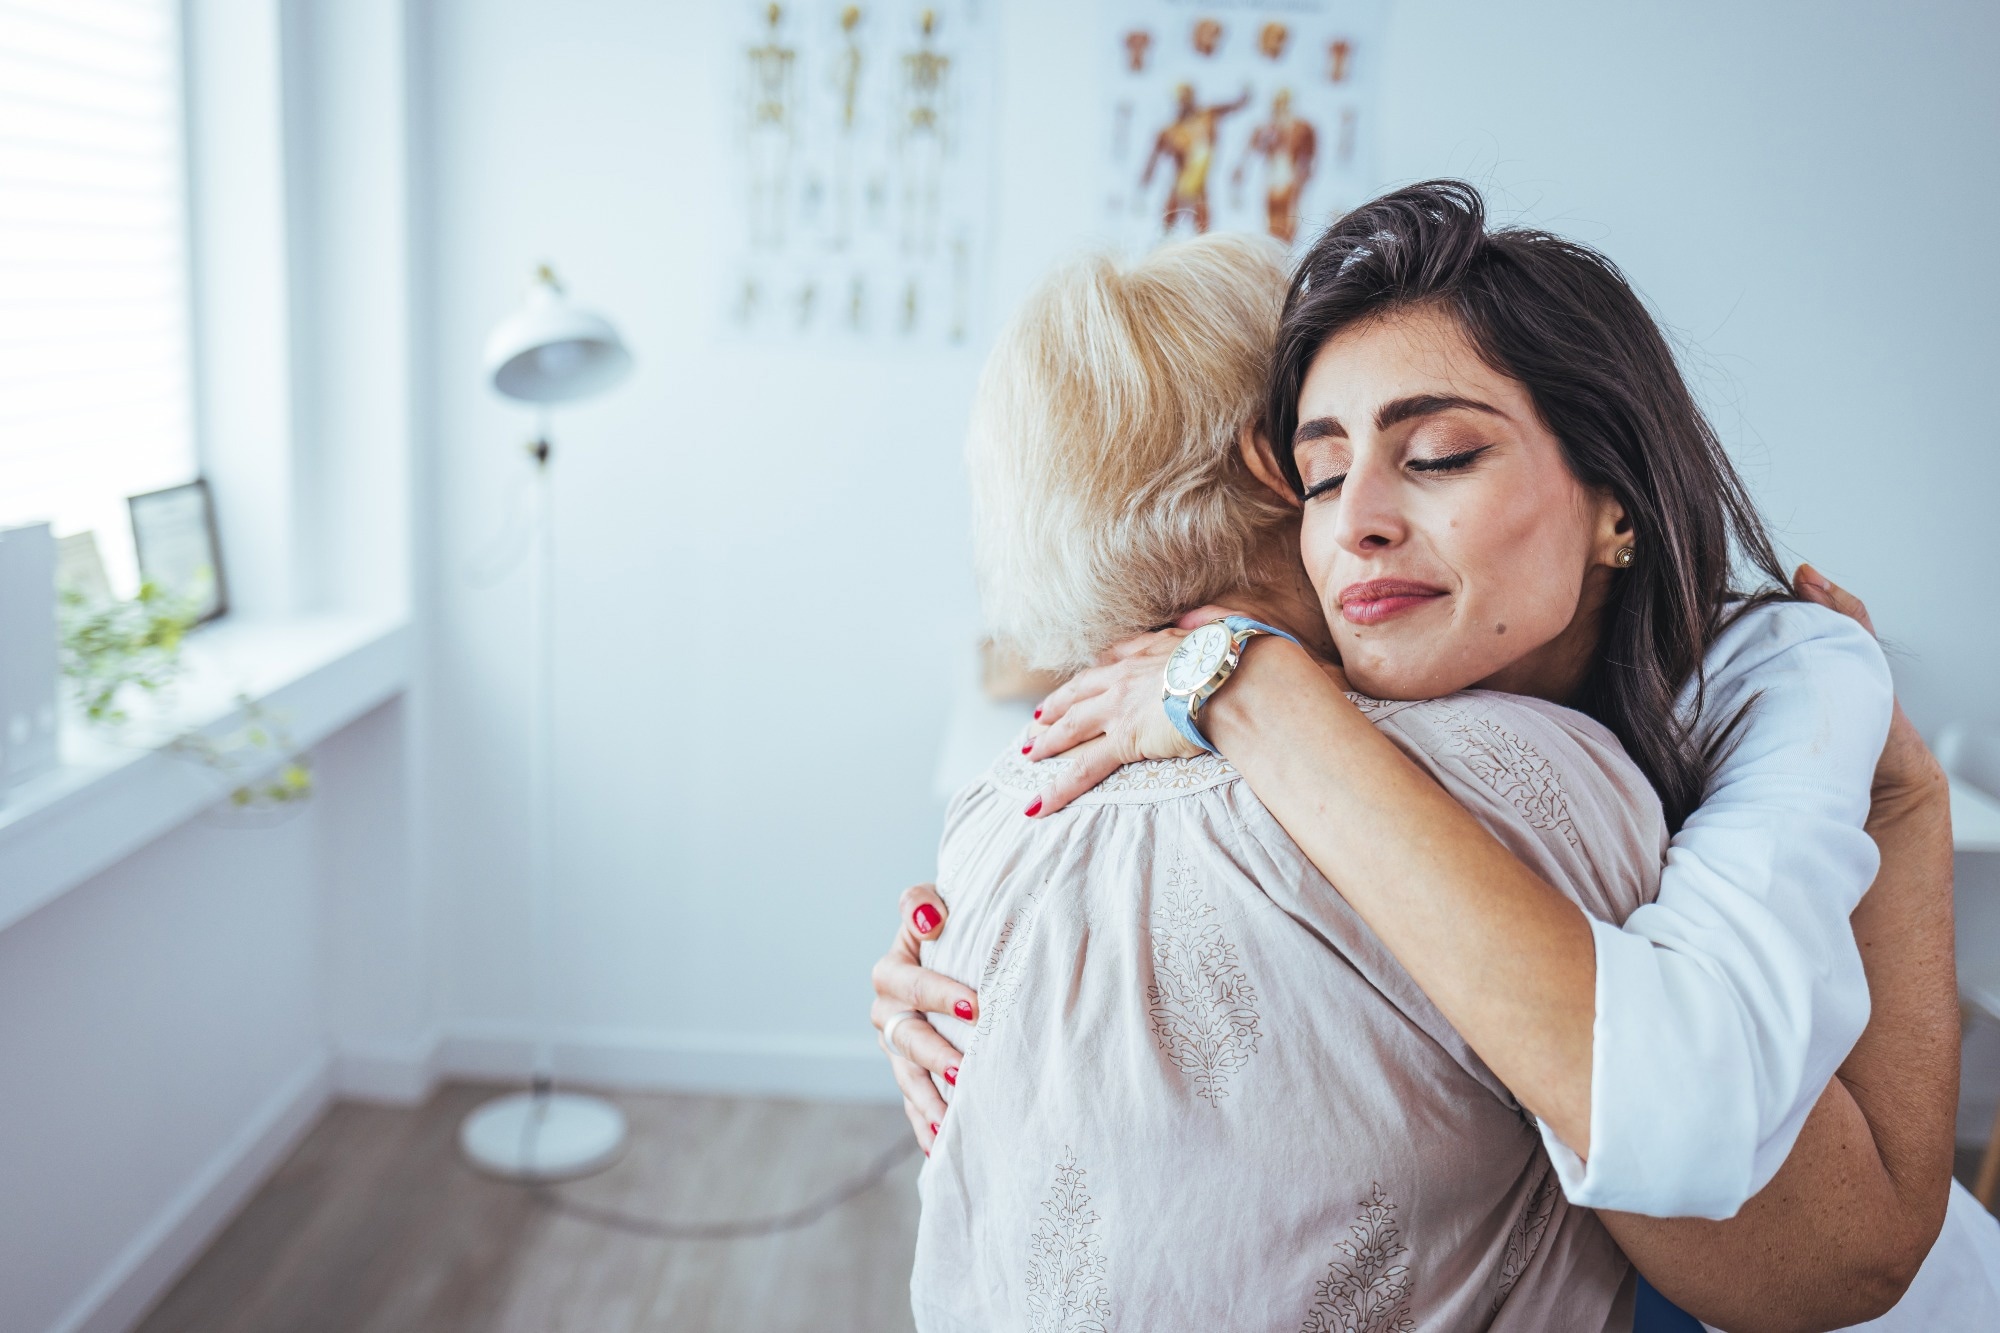 Study: CD38 genetic variation associated with increased personal distress with an emotional stimulus.  Image credit: Dragana Gordic / Shutterstock.com